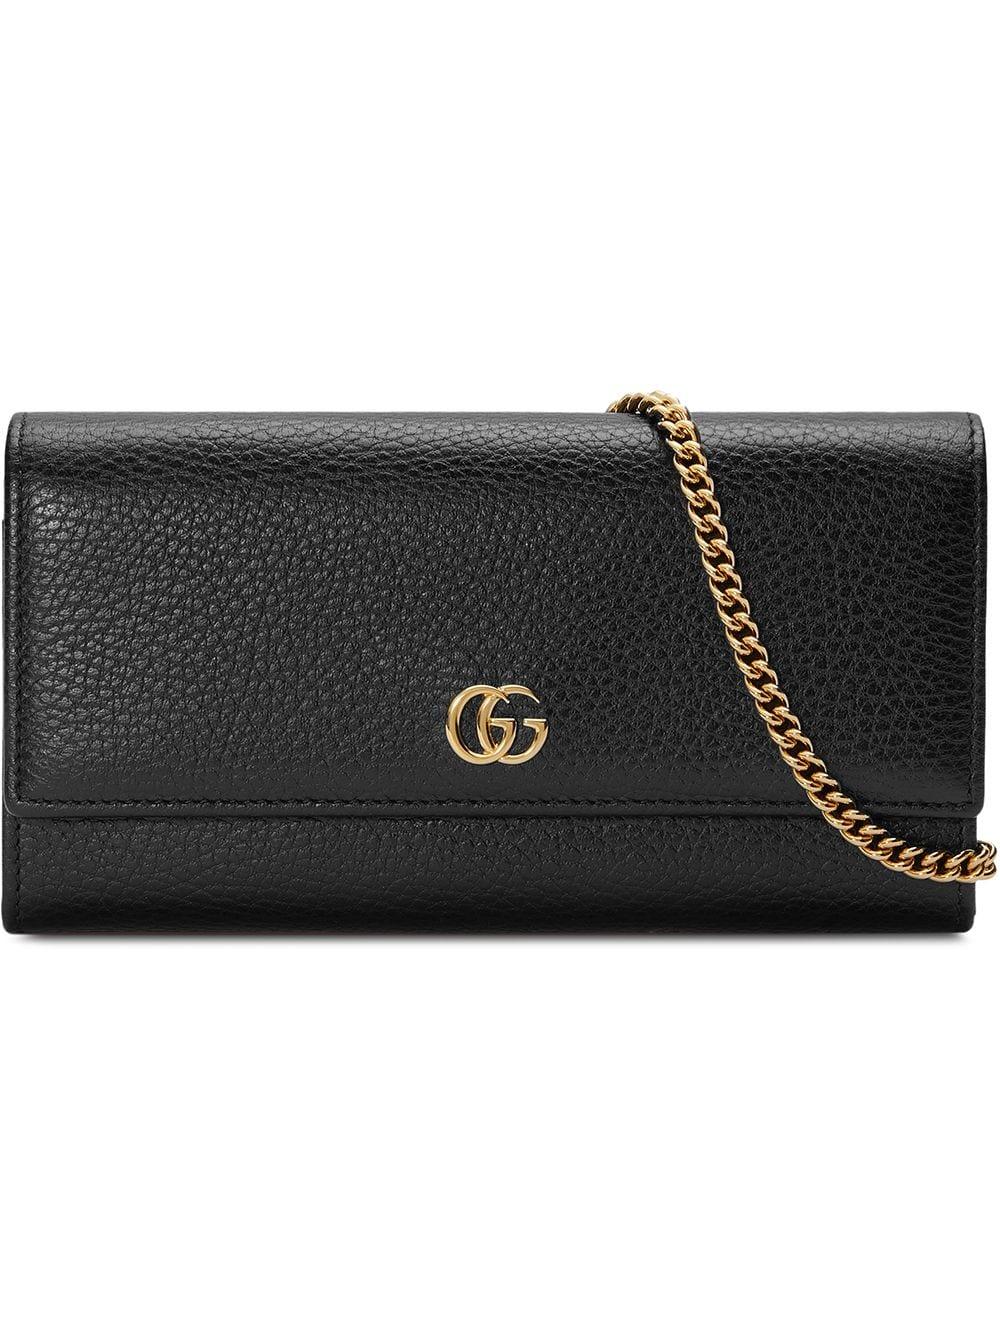 Gucci GG Marmont Leather Chain Wallet in Black | Lyst